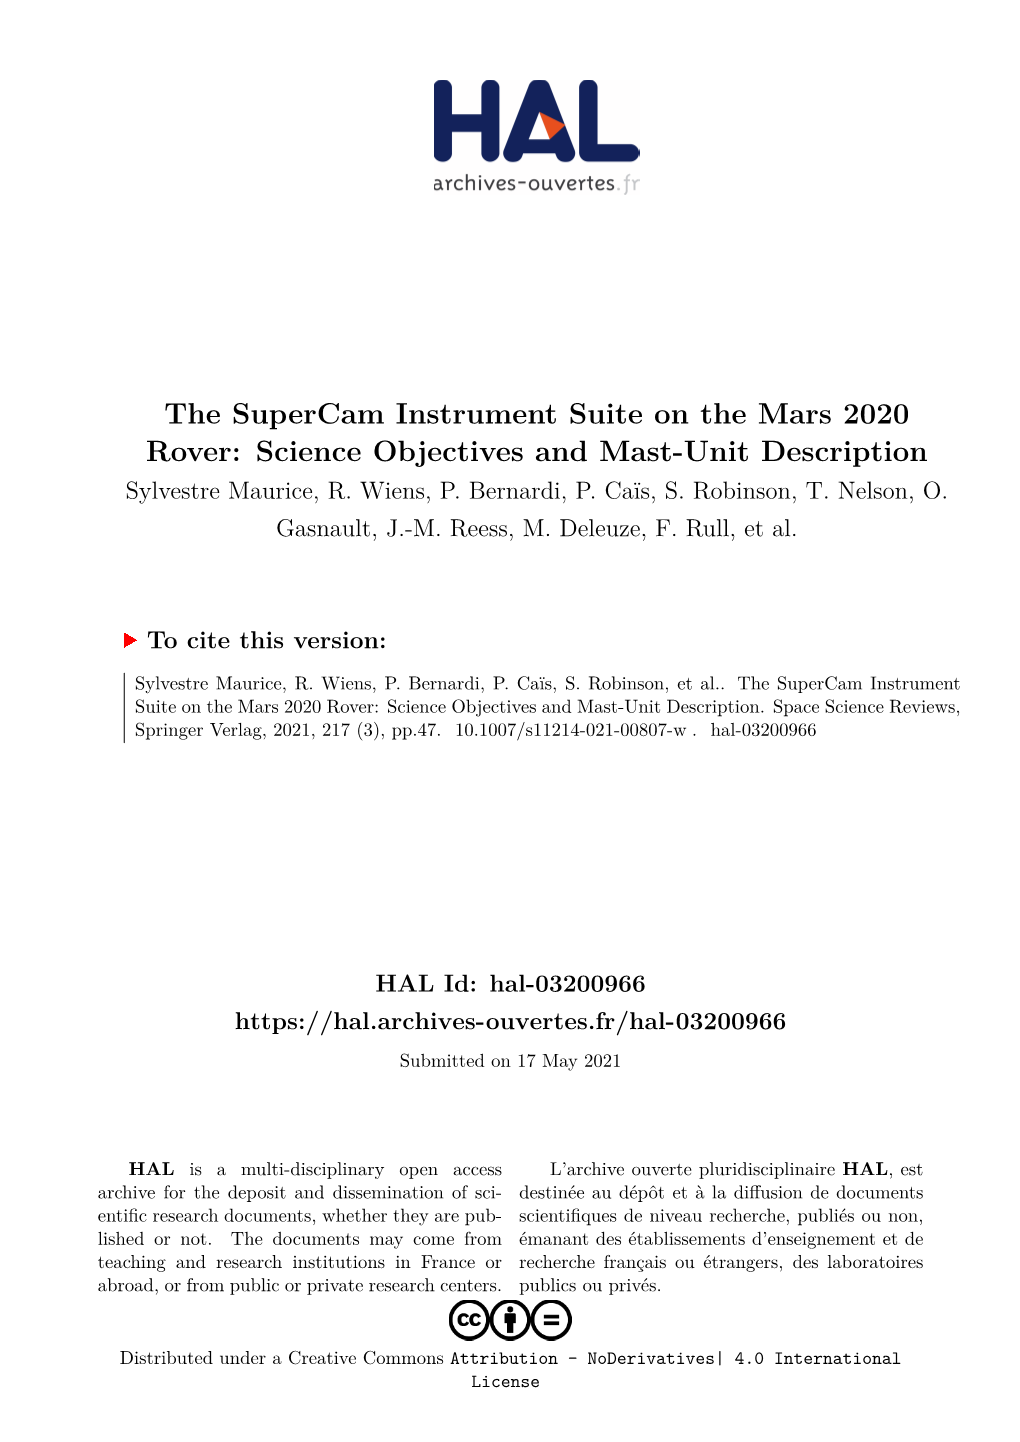 The Supercam Instrument Suite on the Mars 2020 Rover: Science Objectives and Mast-Unit Description Sylvestre Maurice, R